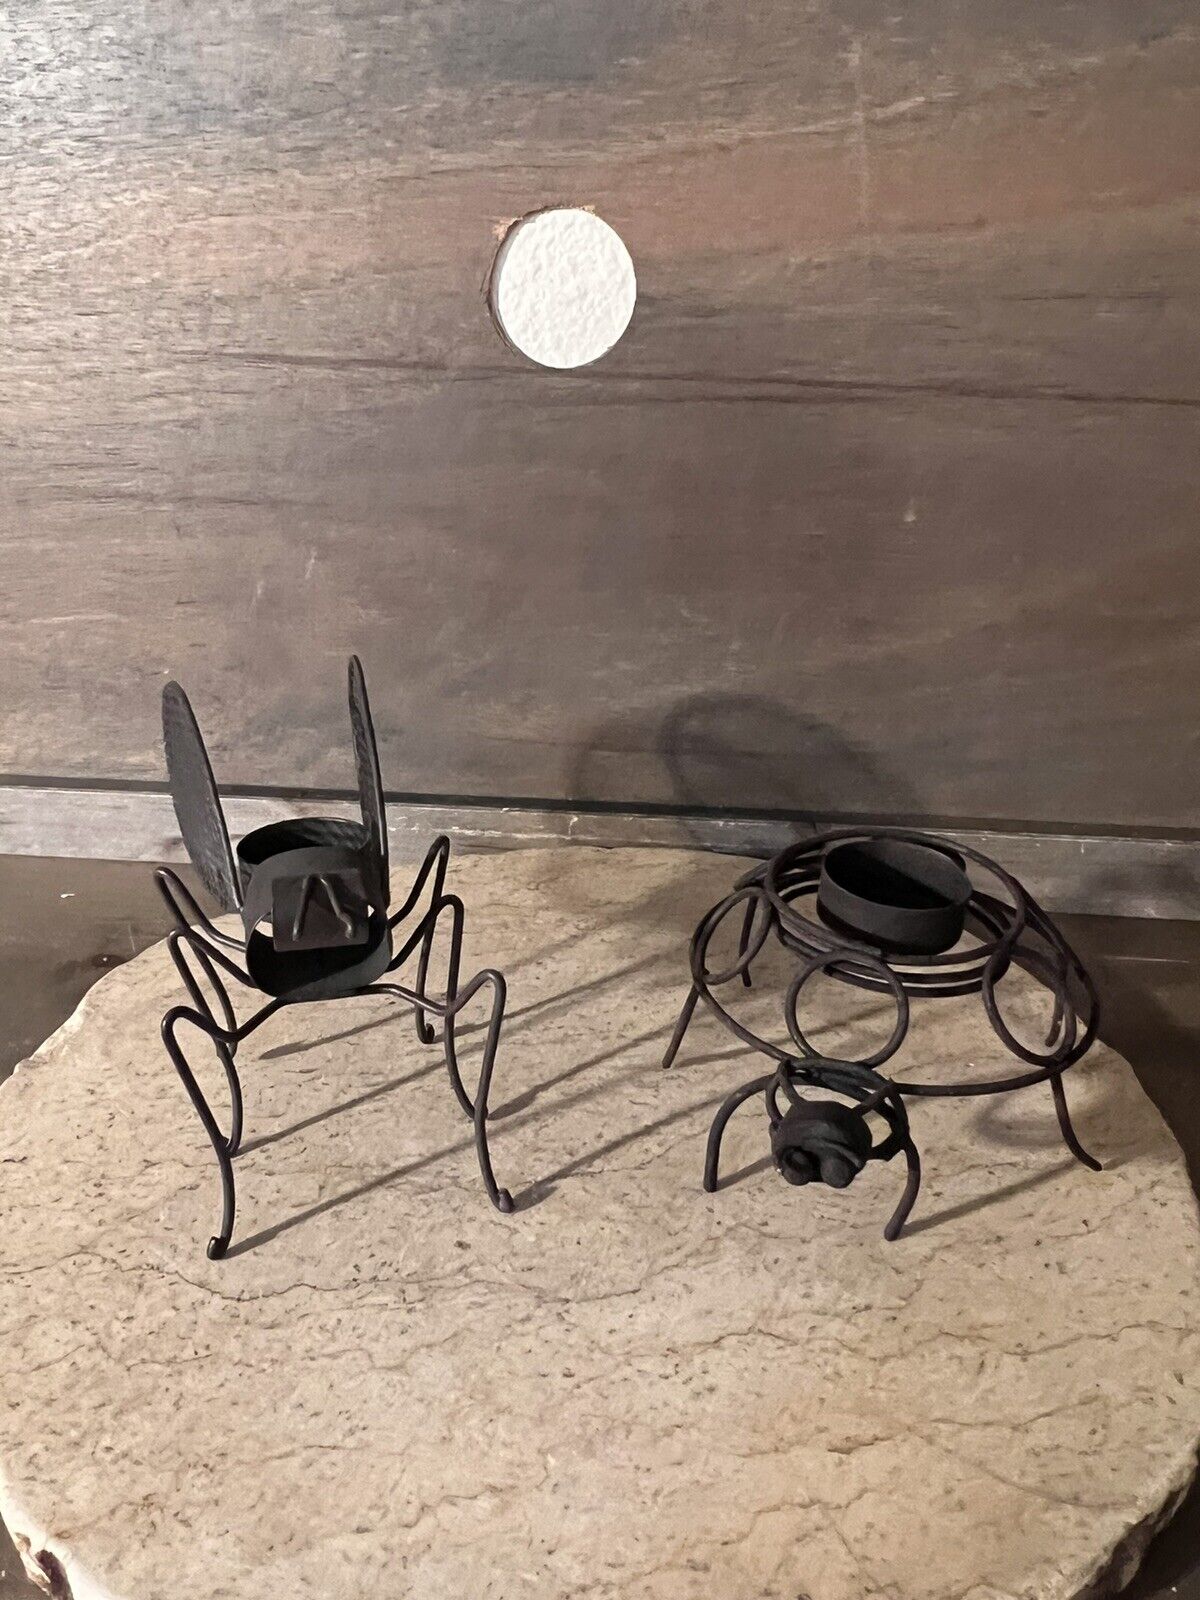 BEE /Ladybug  Tea Candle Holder Black Metal Wire Set Of 2 Insect Bug Decorations